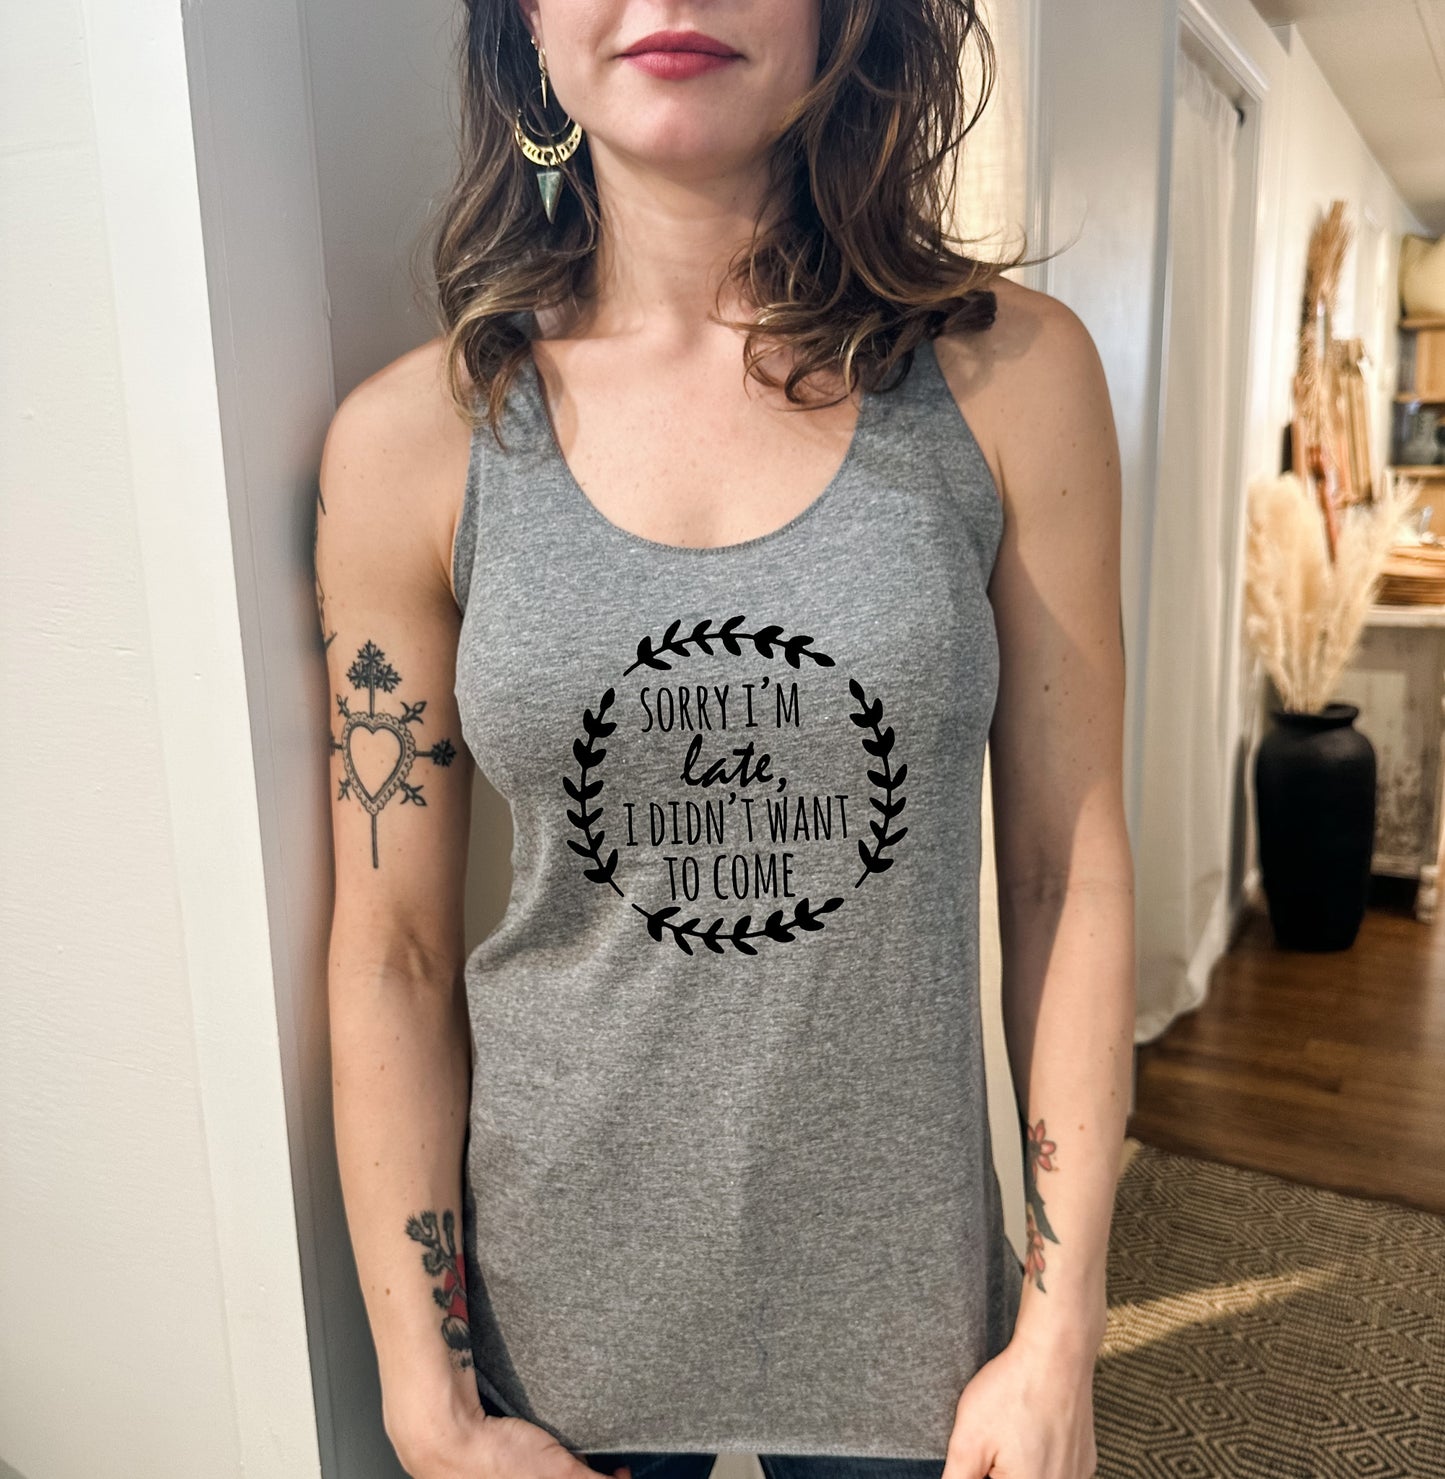 Sorry I'm Late, I Didn't Want To Come - Women's Tank - Heather Gray, Tahiti, or Envy